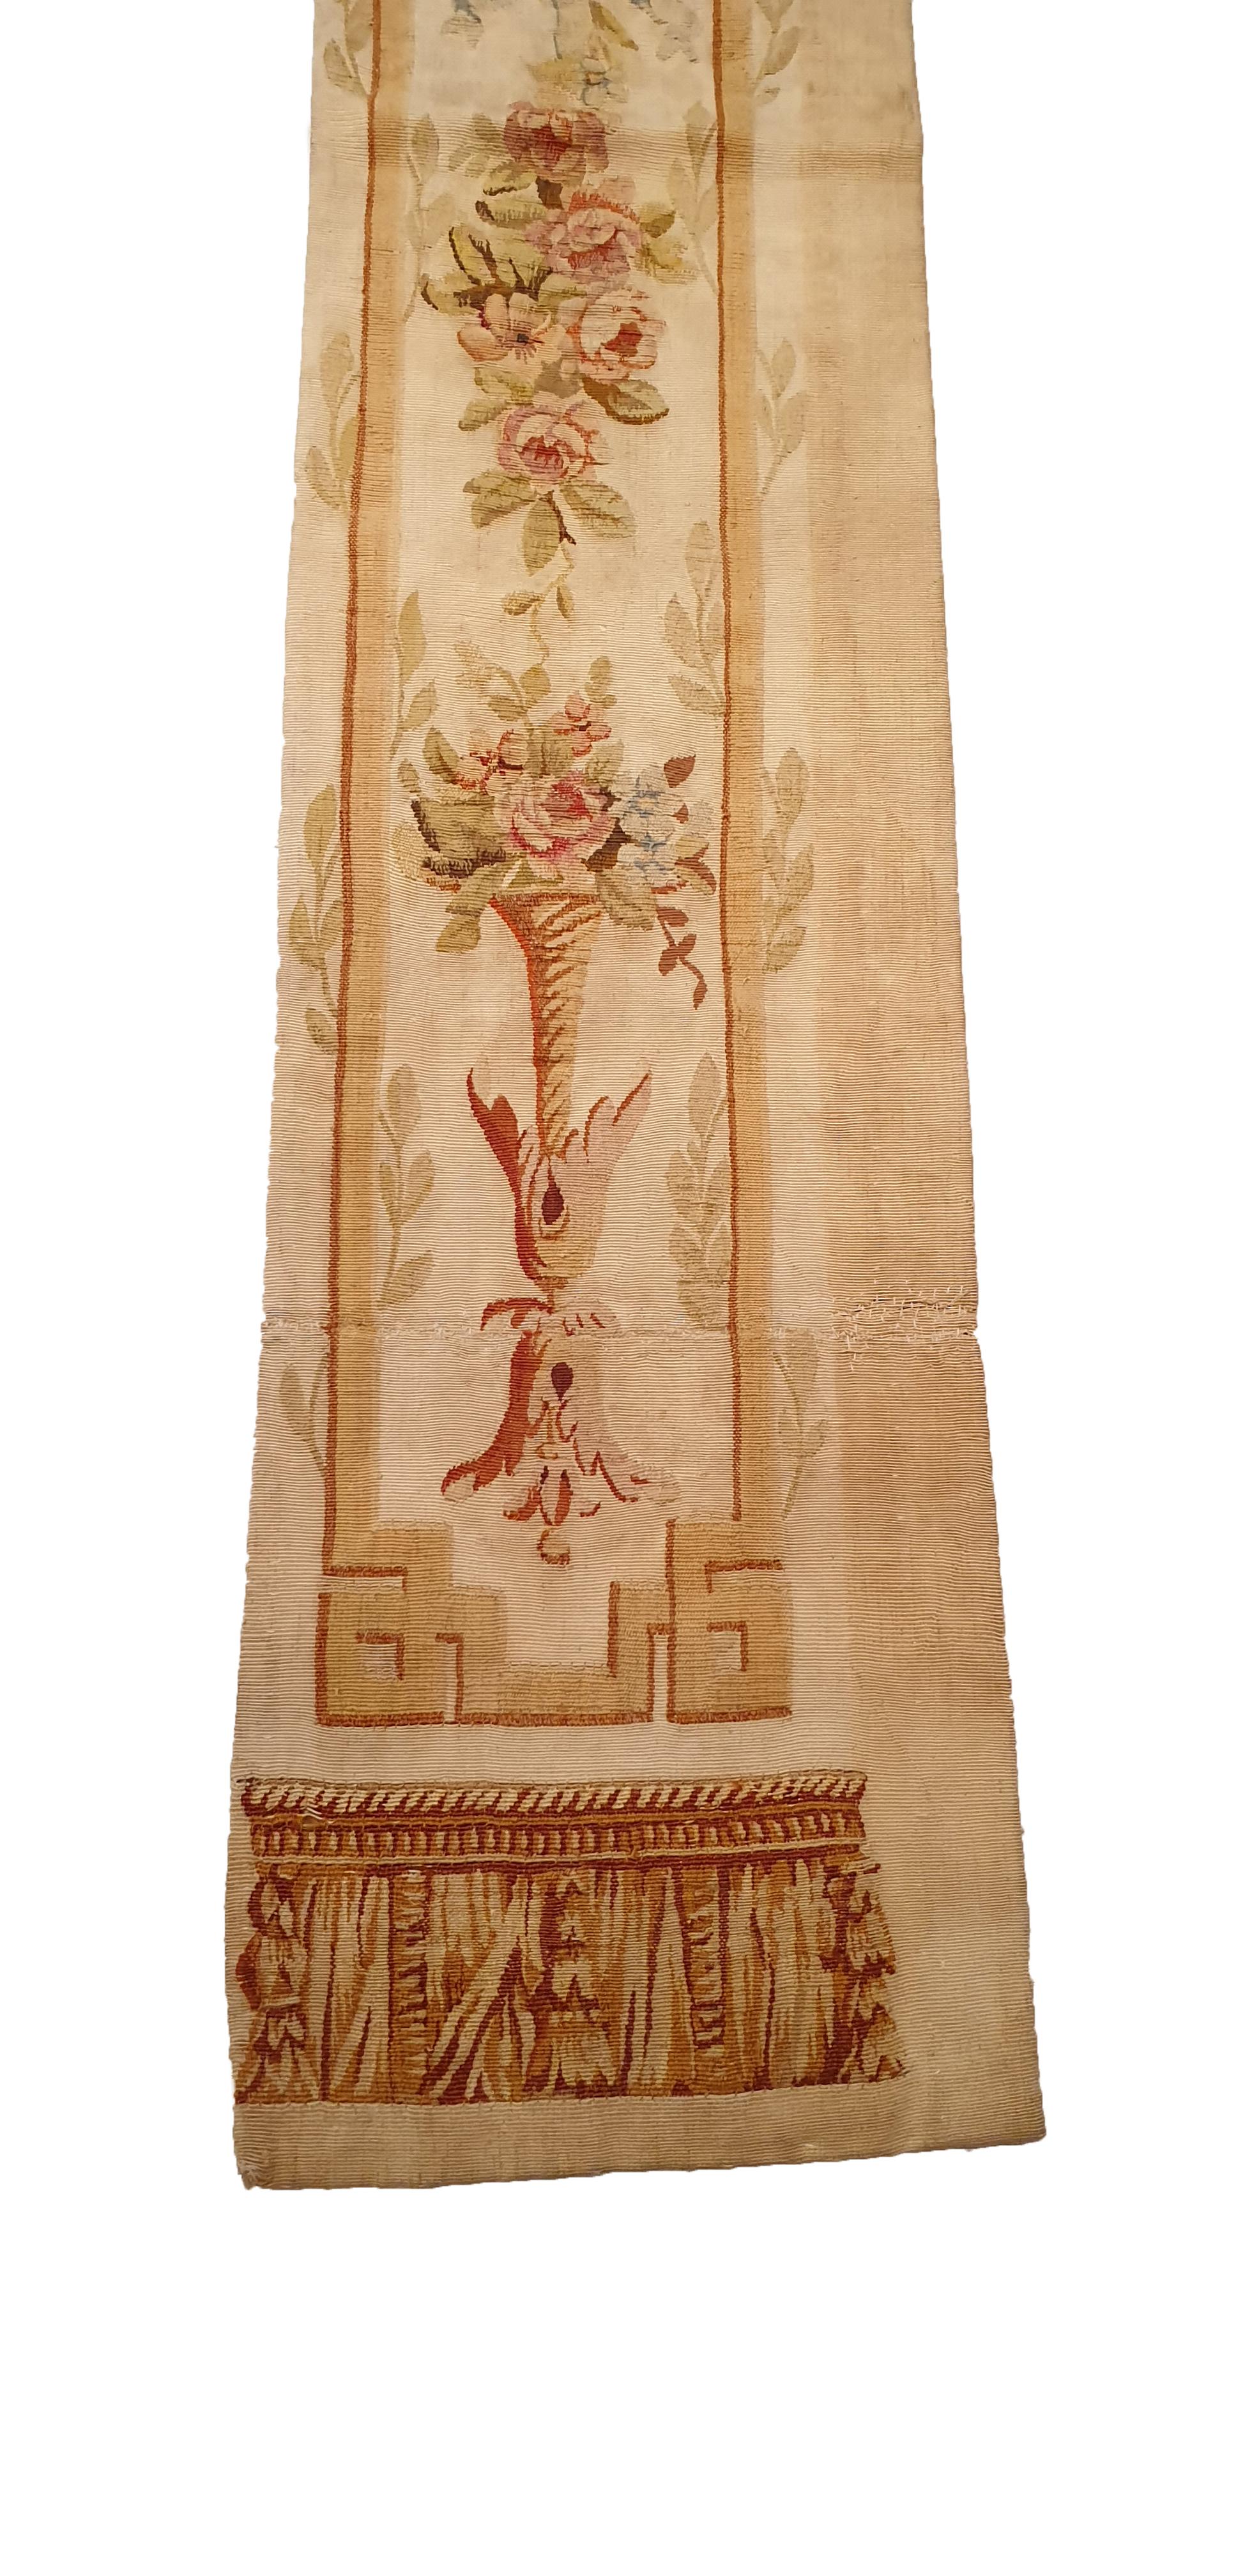 Brussels tapestry handwoven at the beginning of the 19th century. Whether it is a door trick, a play or simple decoration, this flowery work has 200 years of history to tell. 
Reinforcement by a fabric on the back of the work. 
Perfect state of